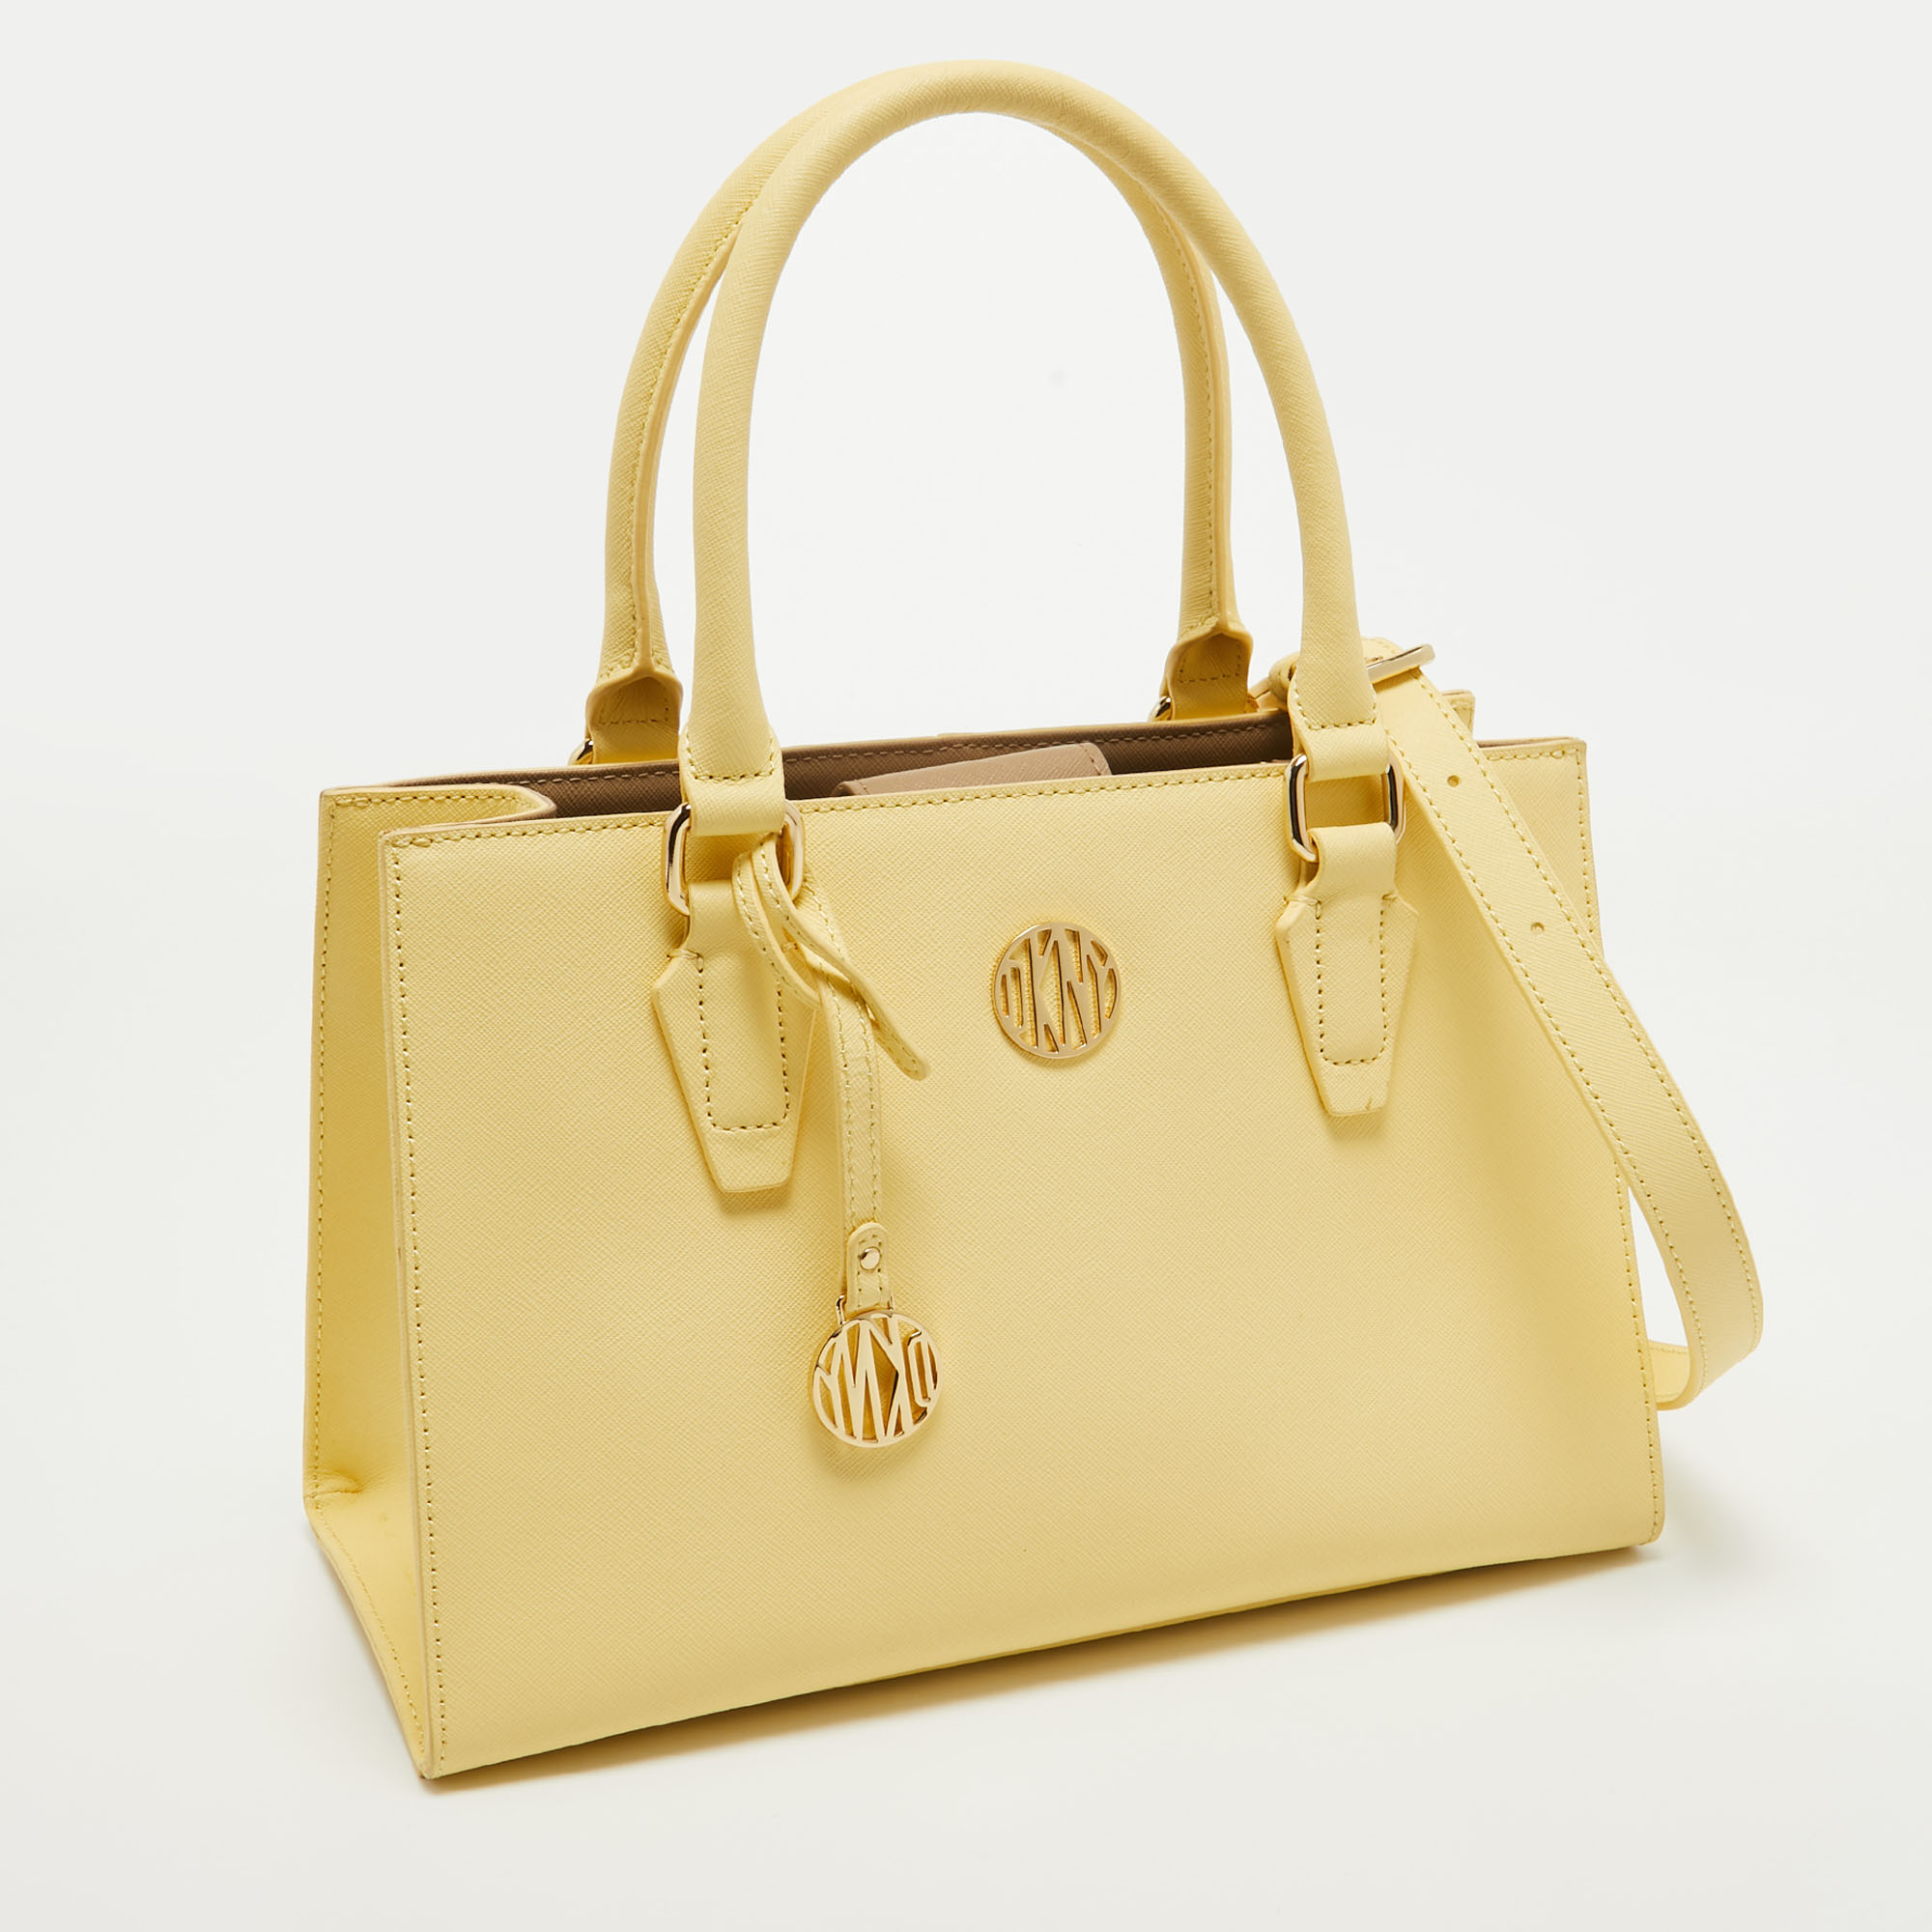 Dkny Yellow Leather Tote